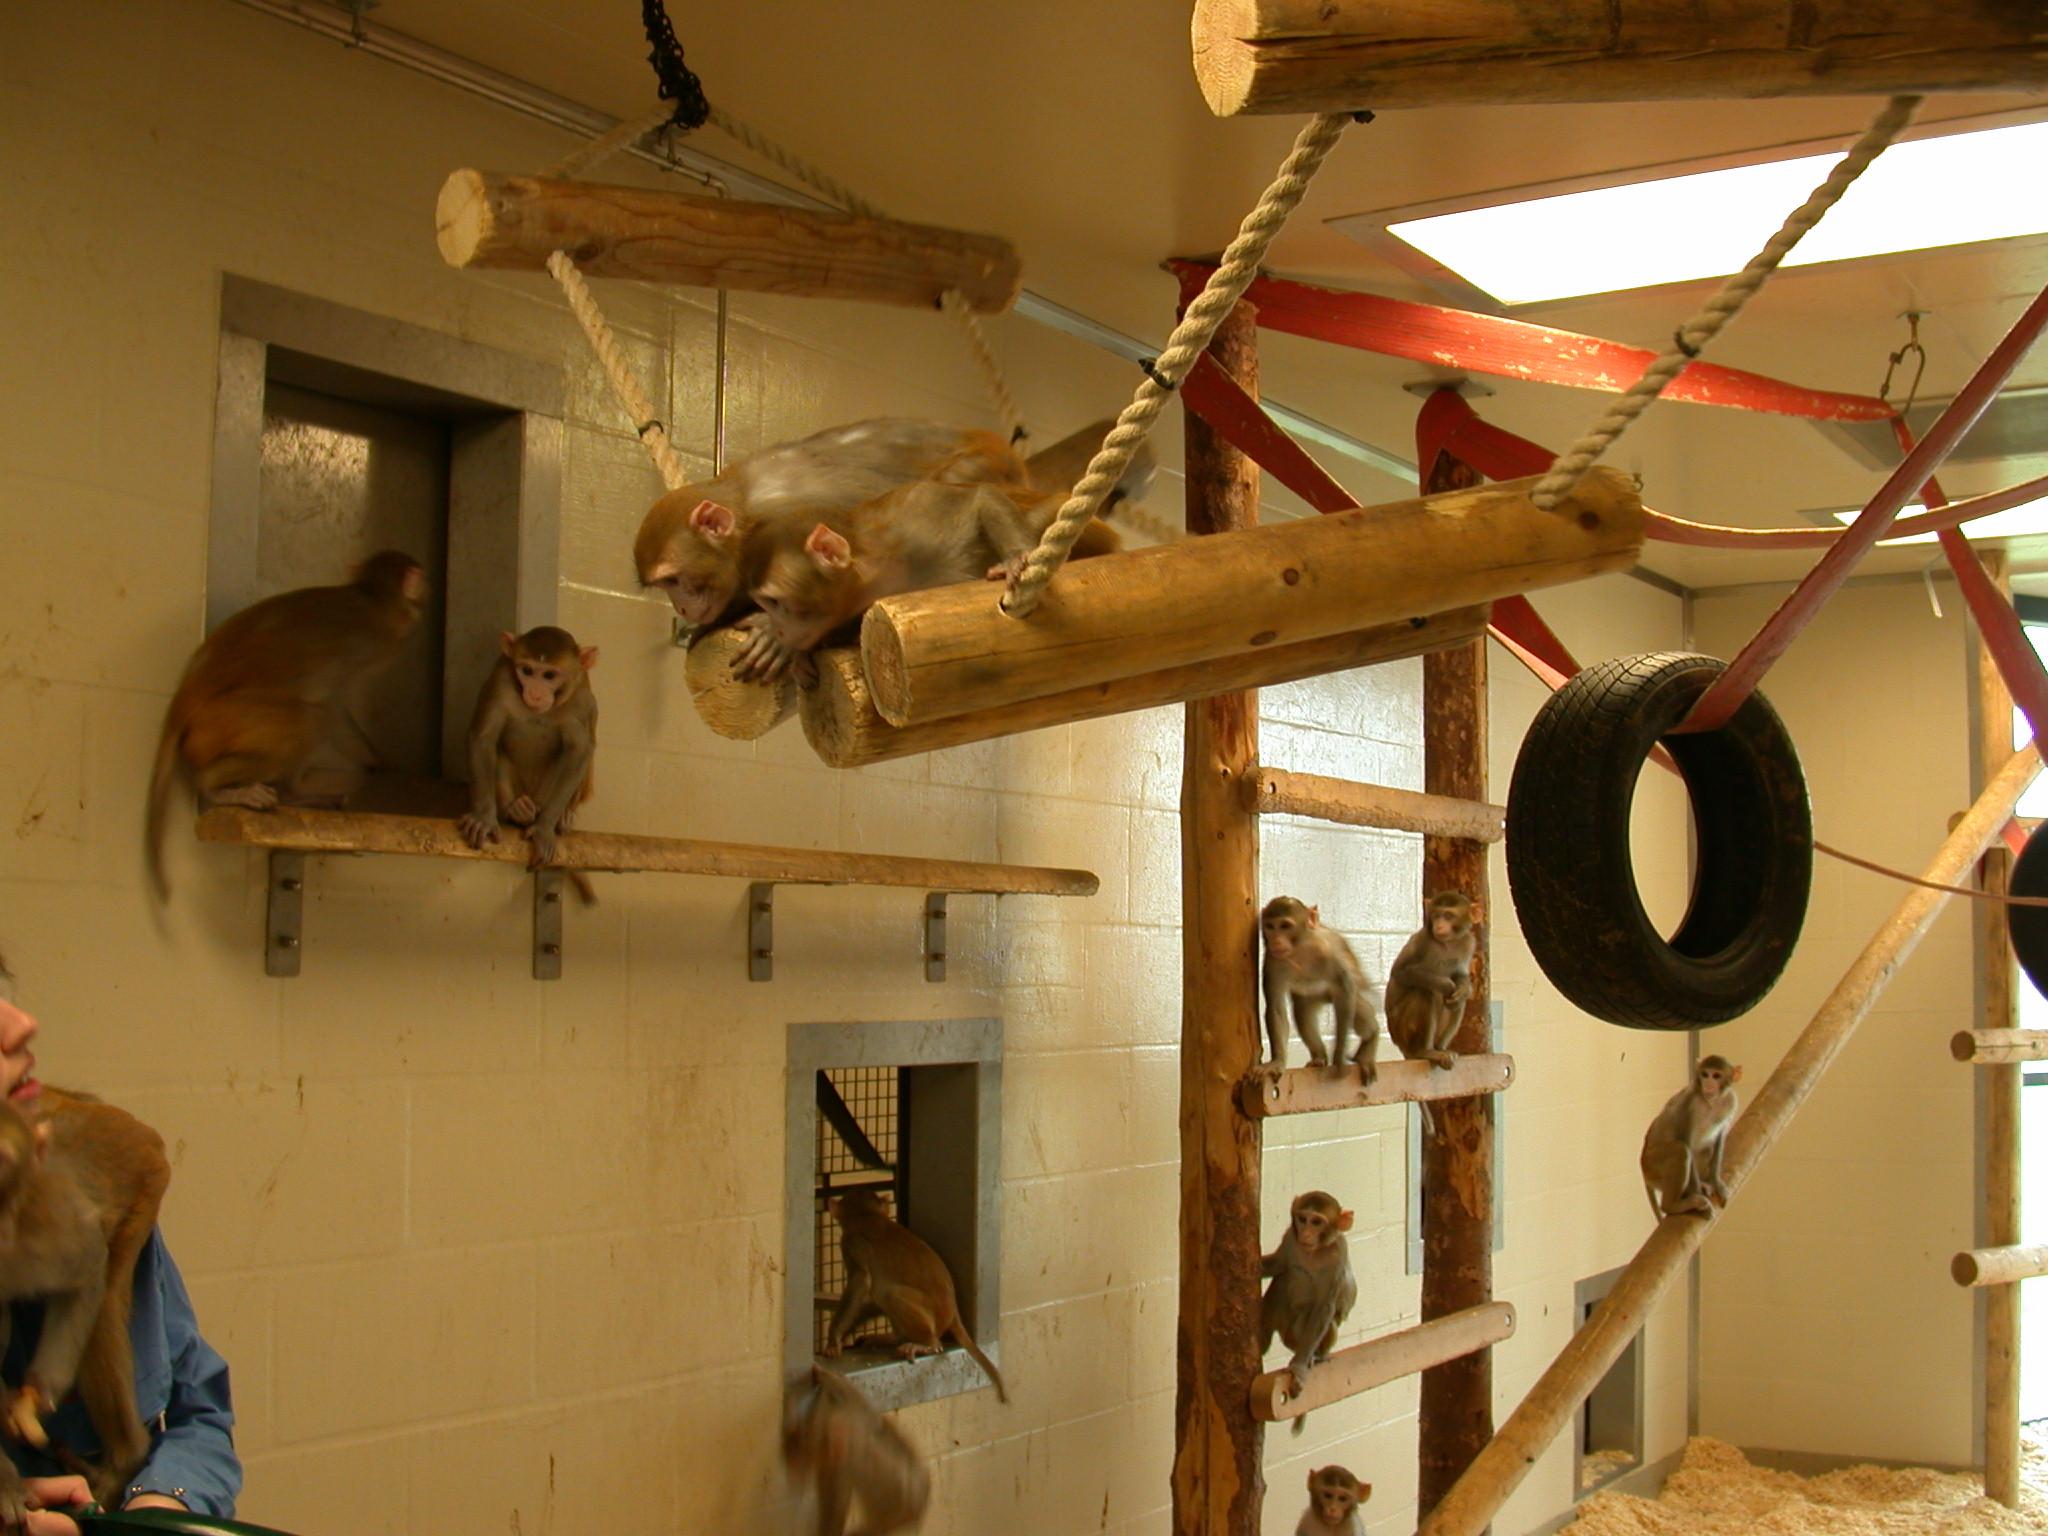 A indoor room showing multiple hatches in the walls that staff can close to separate the monkeys from their play pen into the cage room for husbandry purposes.